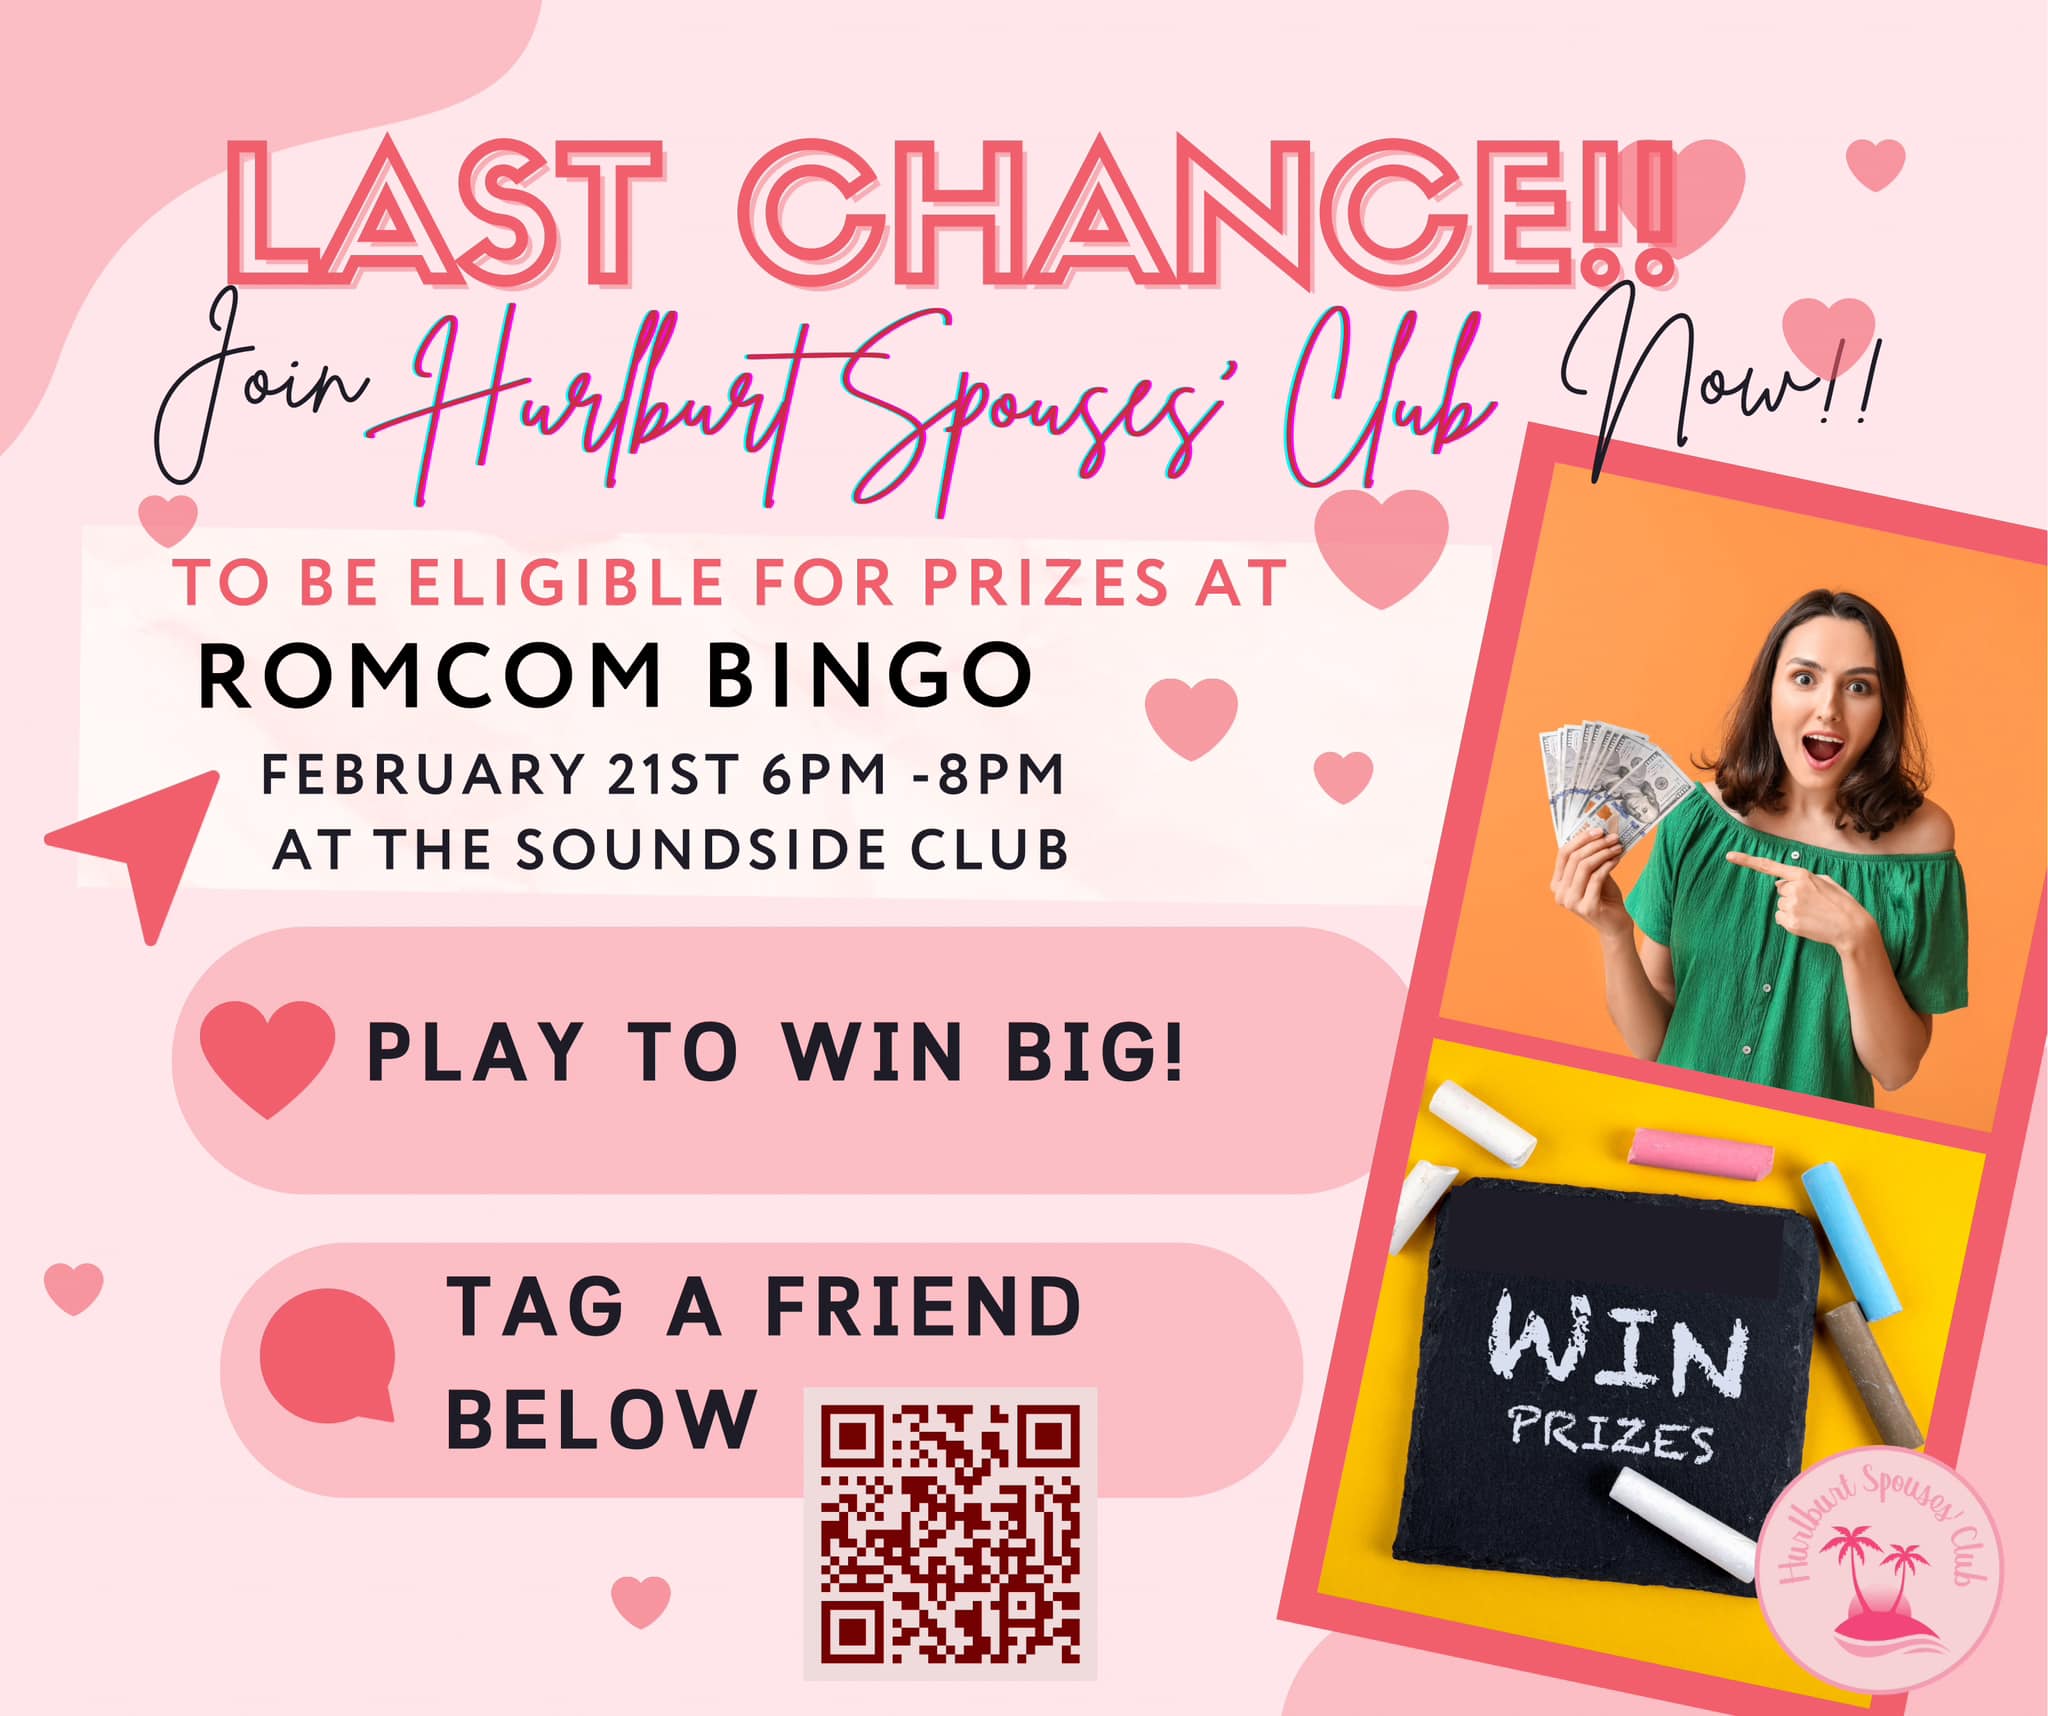 DEADLINE EXTENDED to Join and Play to Win Big at Bingo!